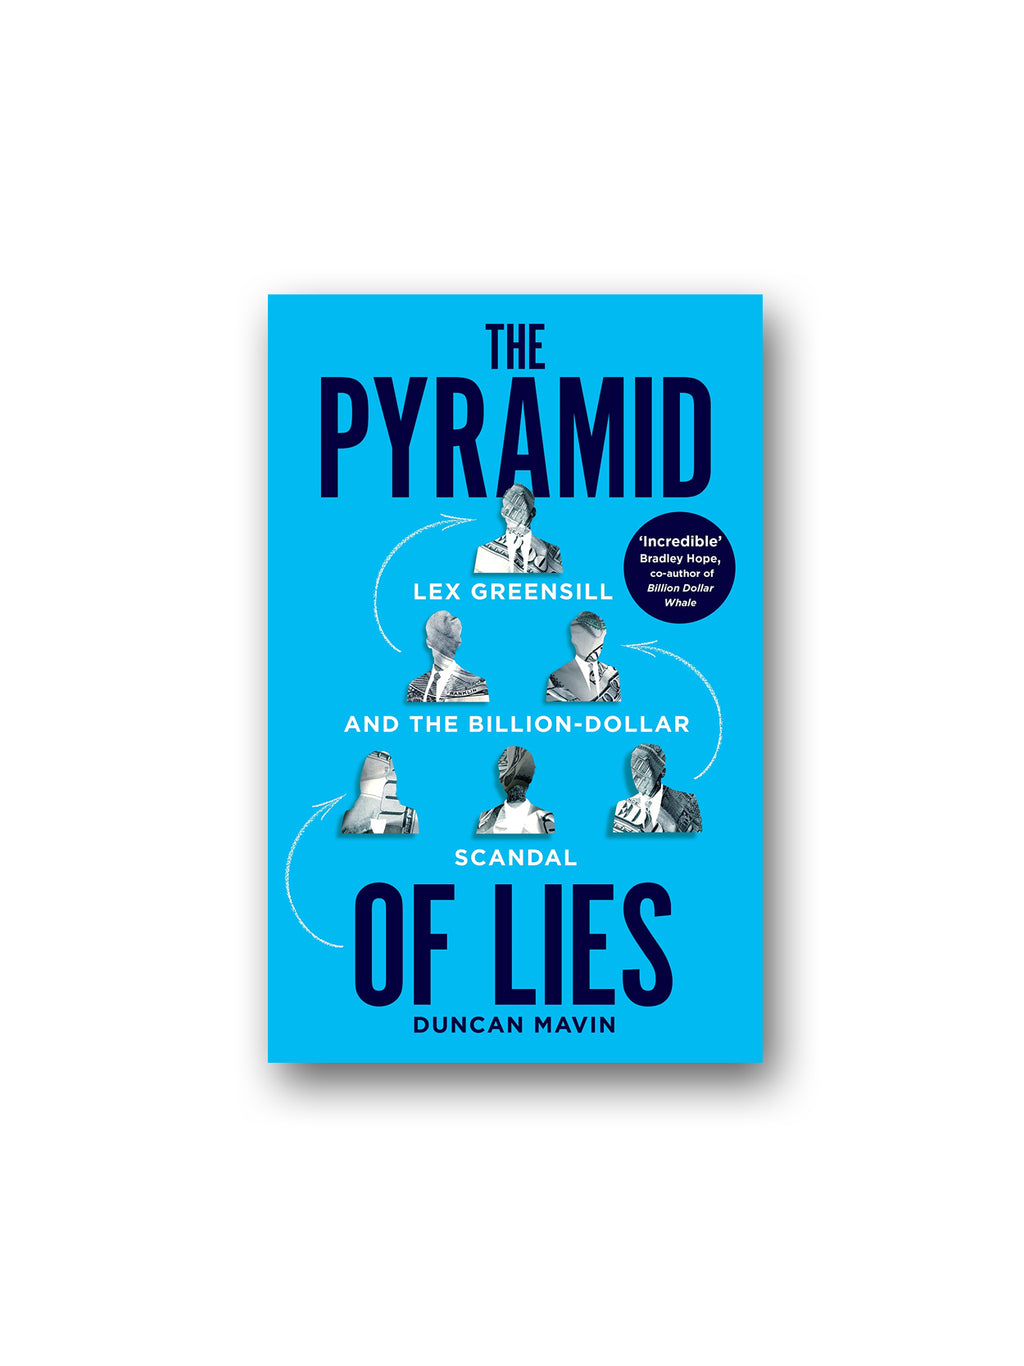 The Pyramid of Lies : Lex Greensill and the Billion-Dollar Scandal